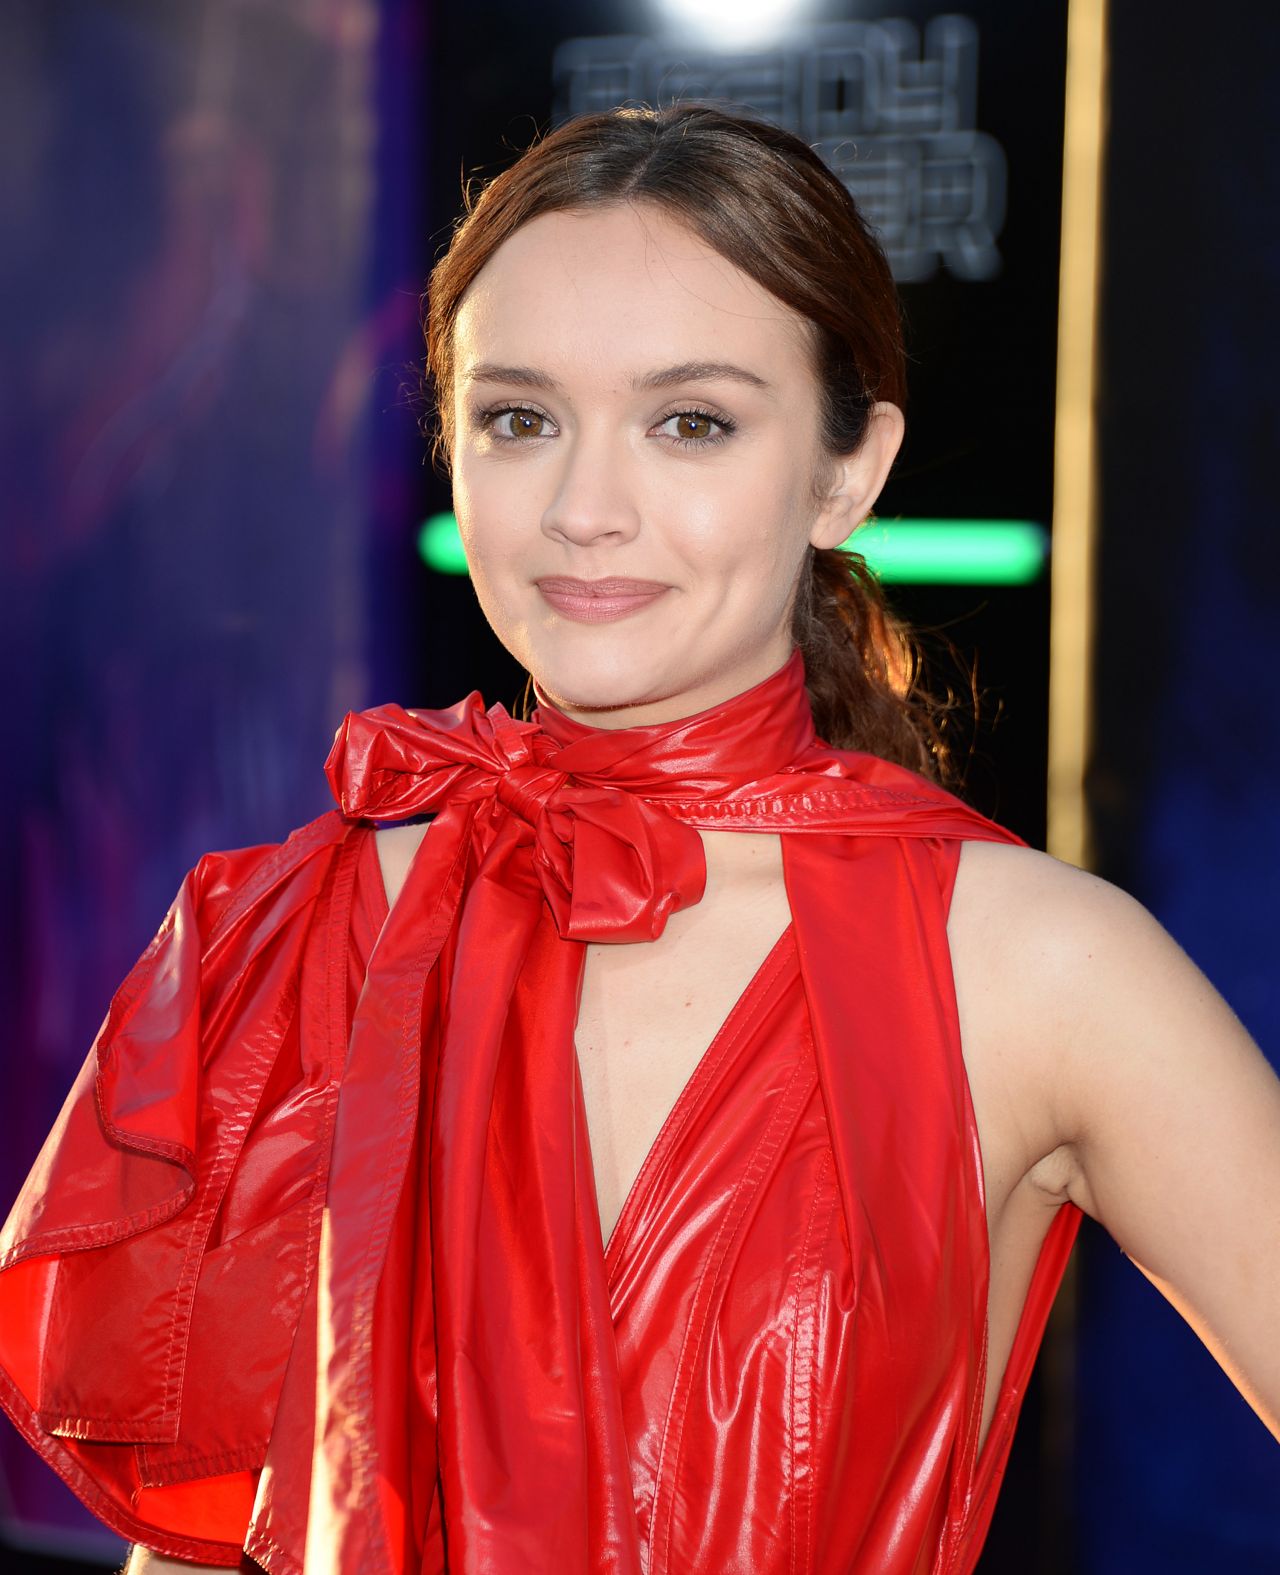 Olivia Cooke - "Ready Player One" Premiere in Los Angeles.